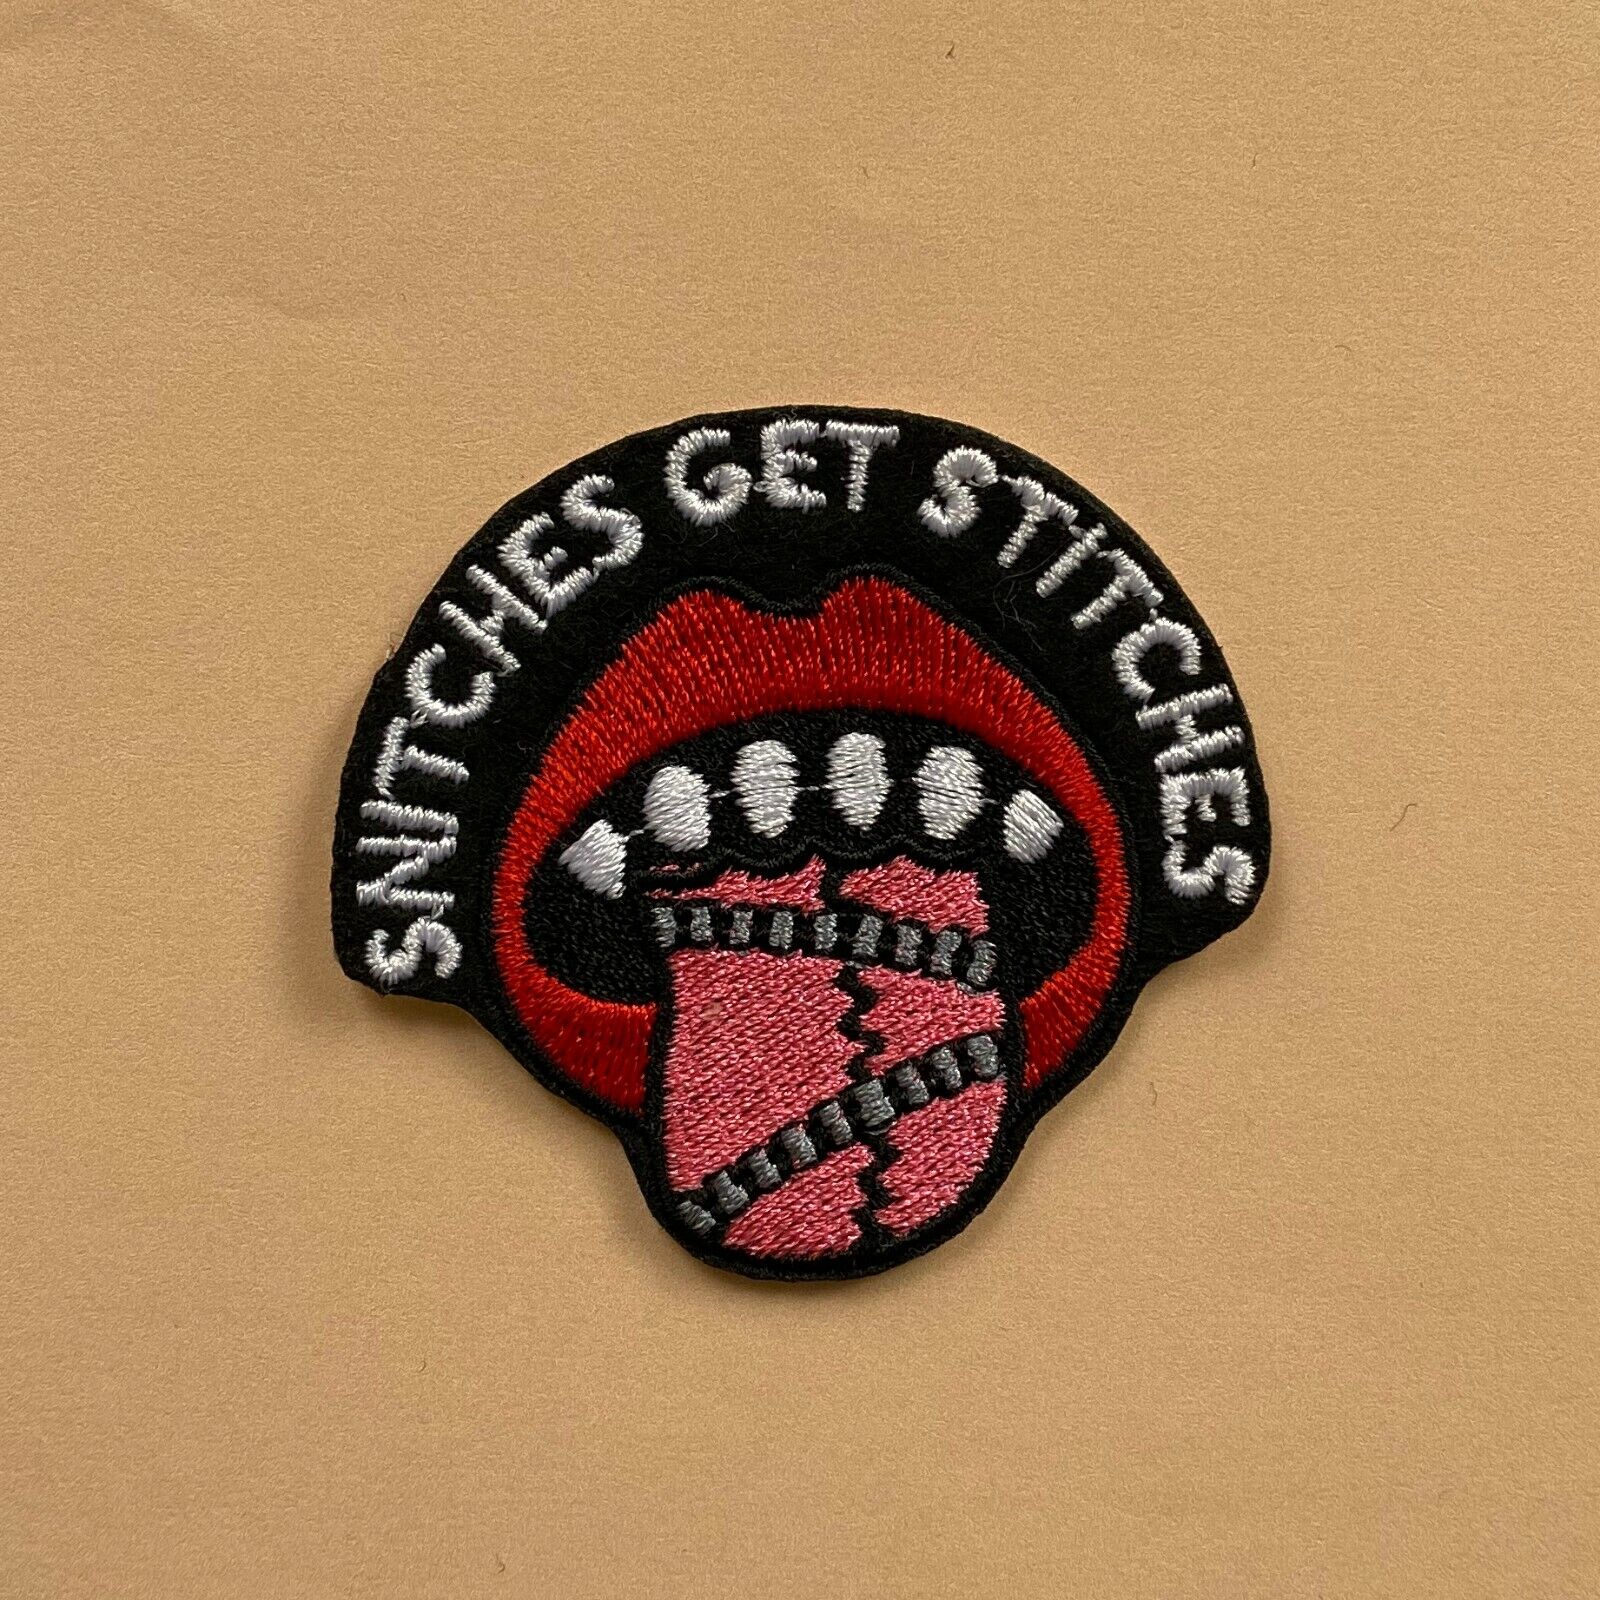 Iron on Patch - Snitches Get Stitches Embroidered Hip Hop Rap